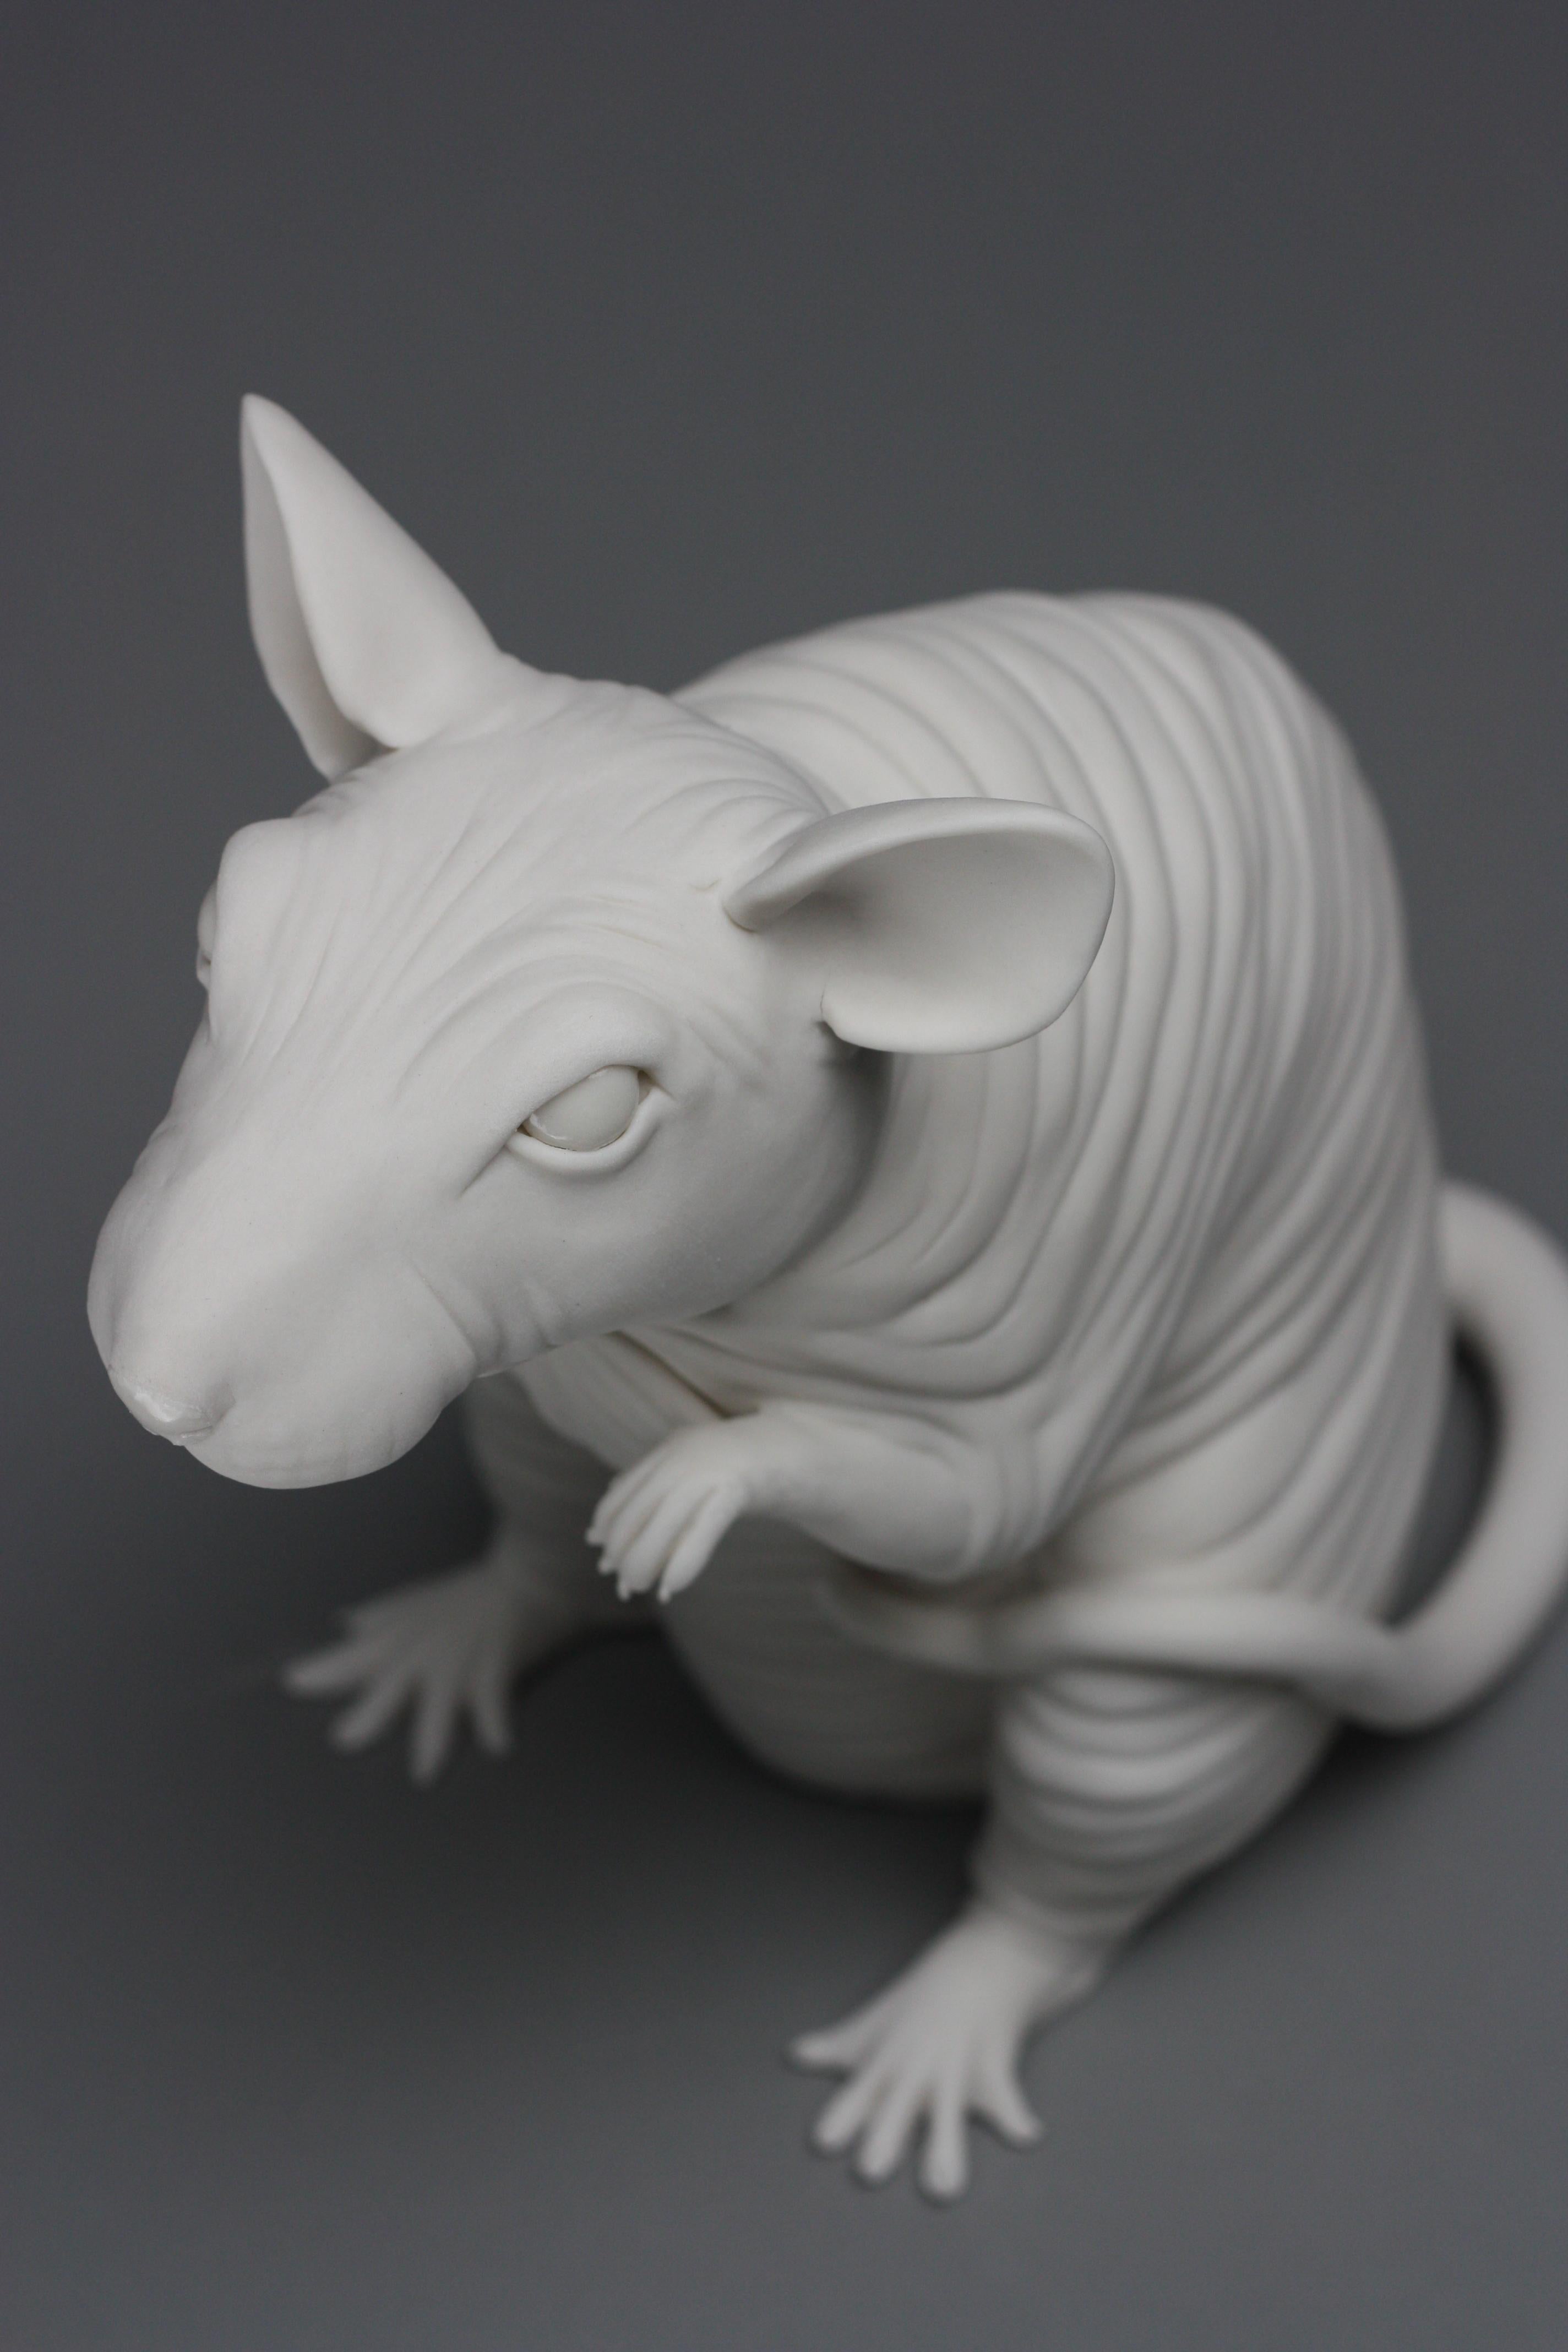 This exquisite porcelain, hairless, rat sculpture is hand-built without the use of molds by New York artist, Bethany Krull.  The super white porcelain is built solid on a system of armatures.  Once the details and surface are perfect, Krull